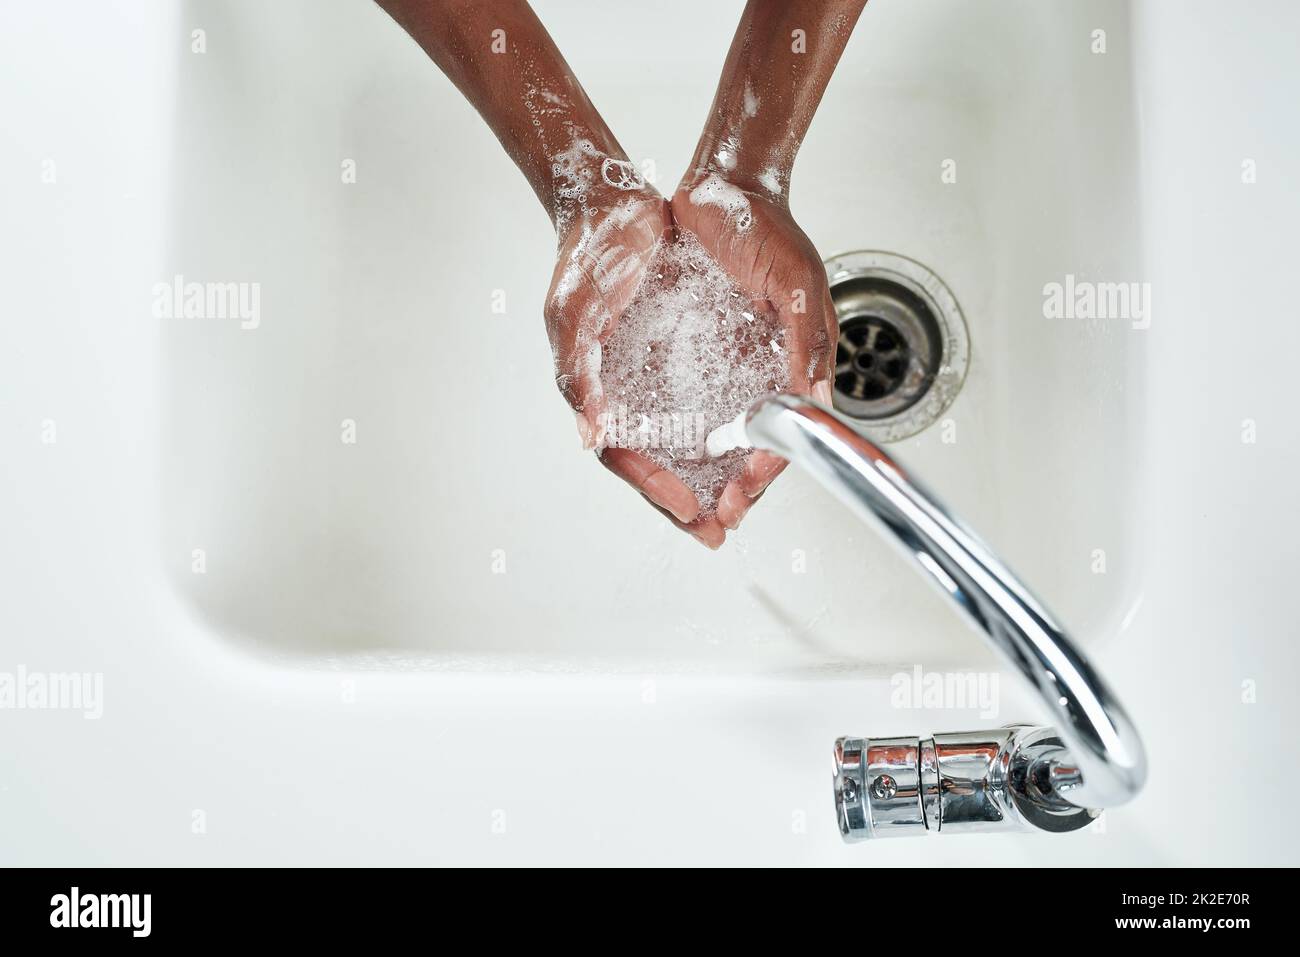 Freshening up. Shot of hands being washed at a tap. Stock Photo